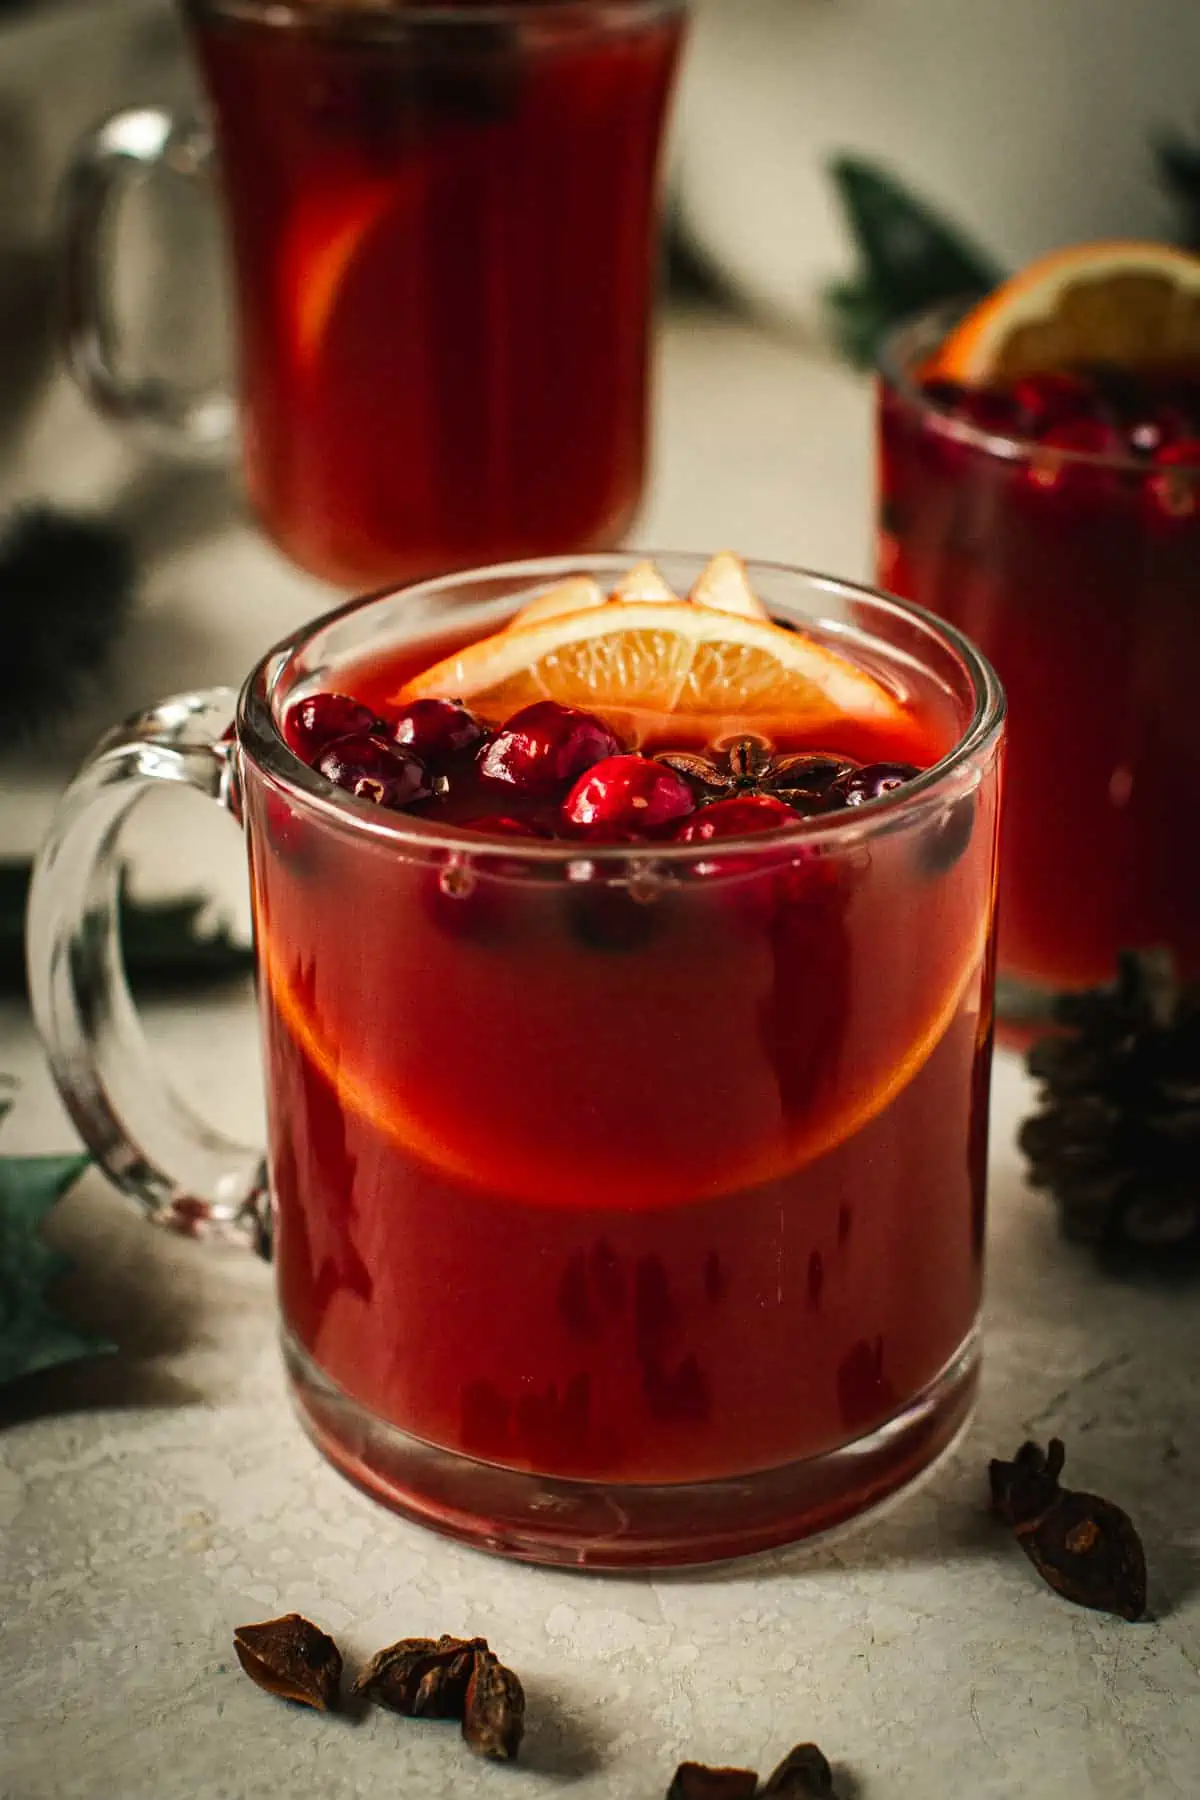 Wassail in a glass mug with fresh cranberries and orange slices for garnish.